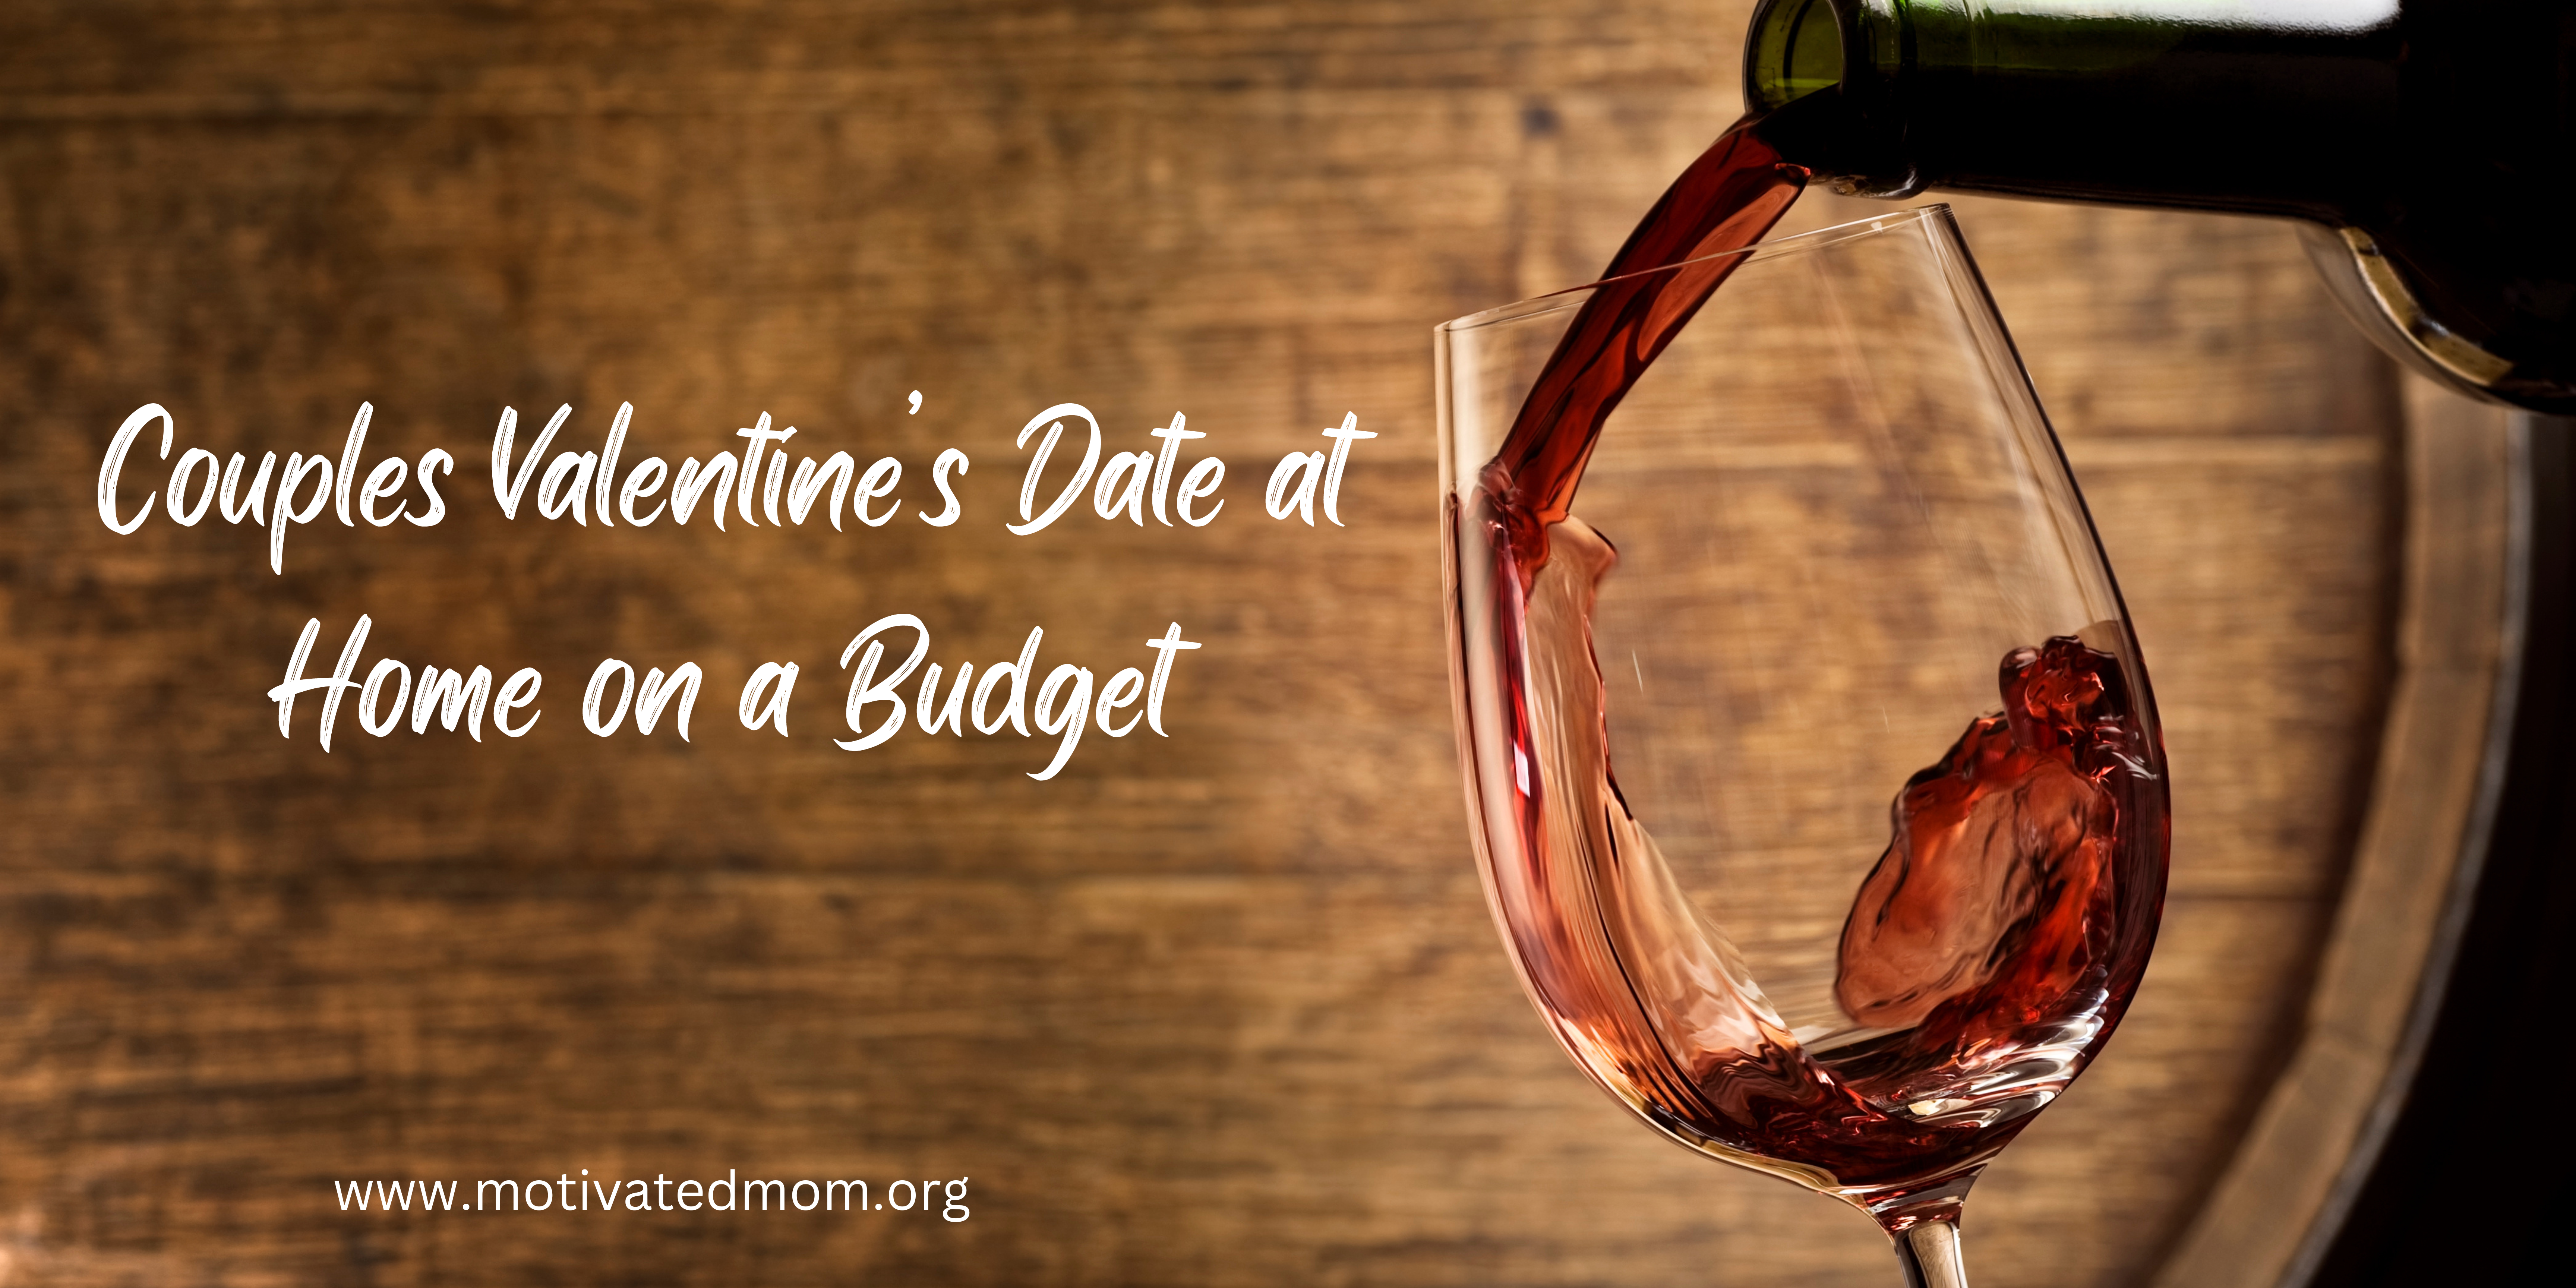 Couples Valentine’s Date at Home on a Budget